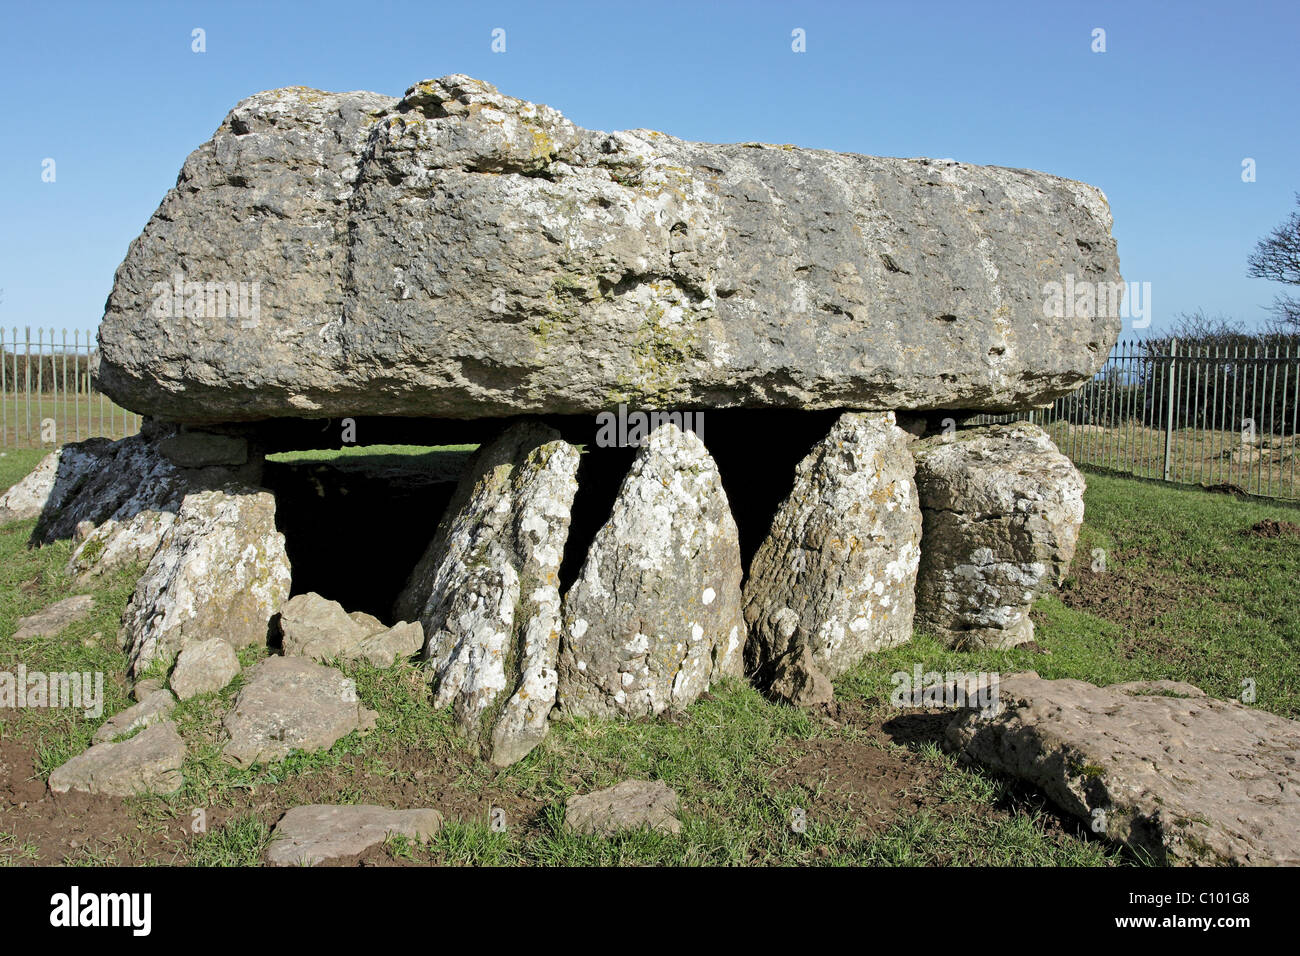 A view of the late neolithic burial chamber excavated at Lligwy, near Moelfre on the Isle of Anglesey, North Wales Stock Photo